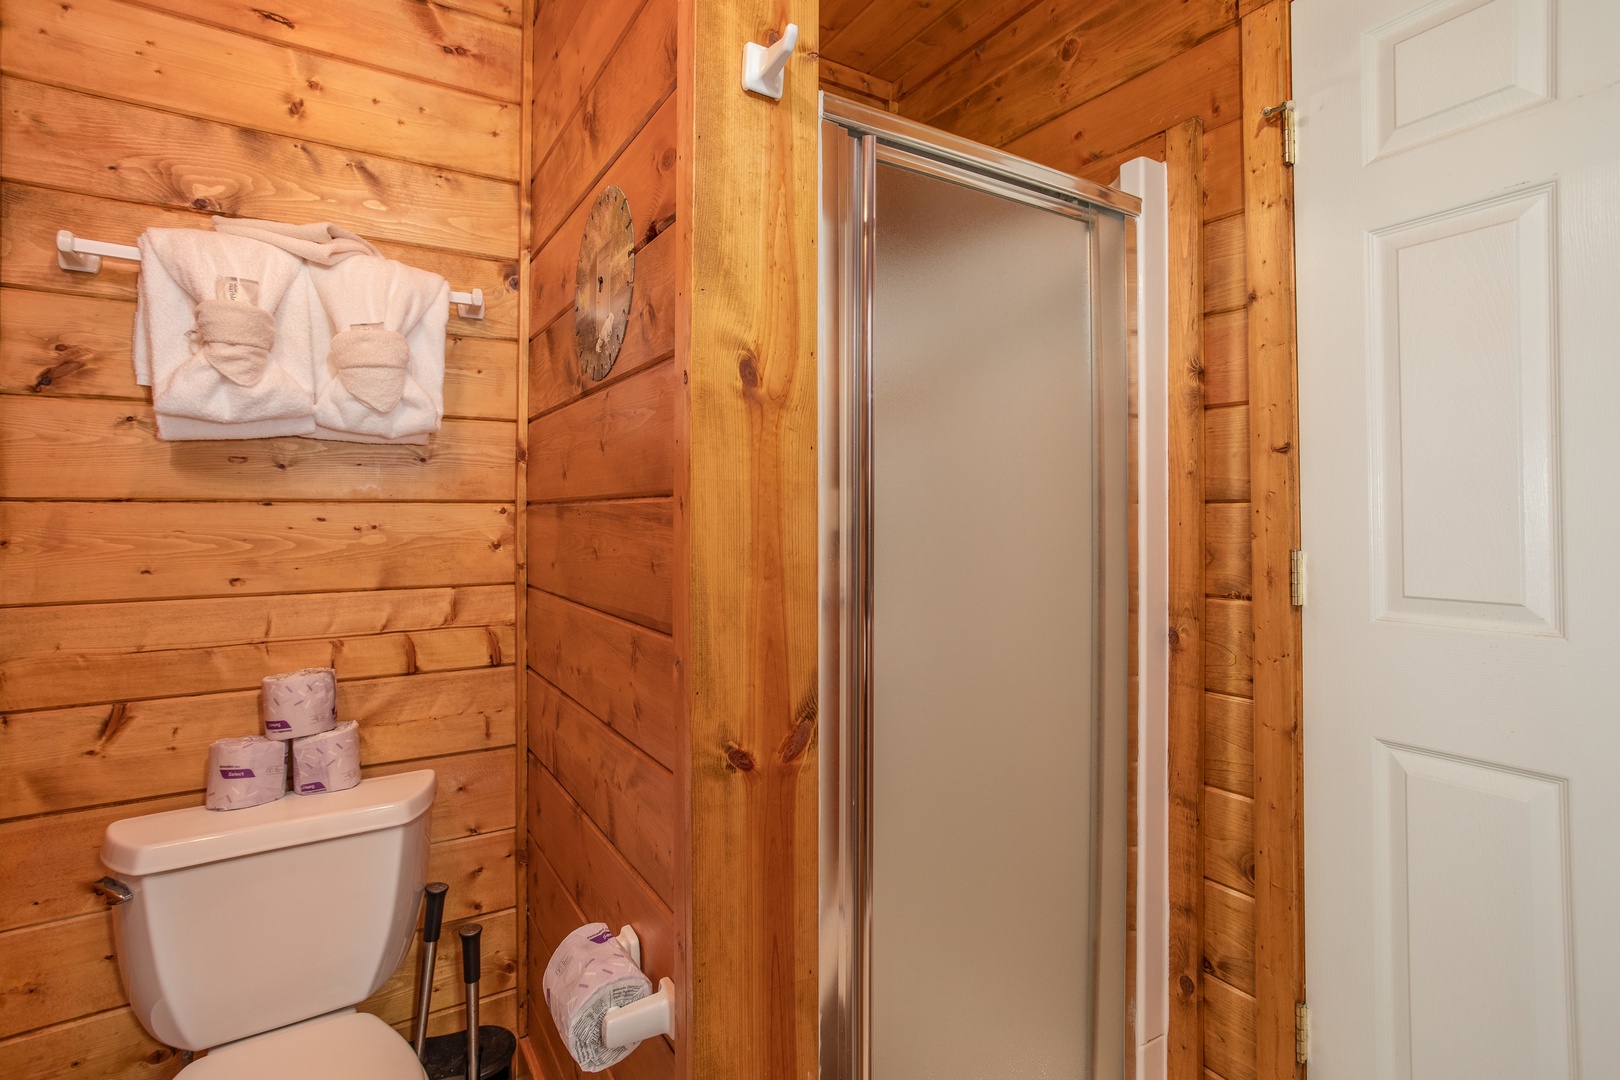 Bathroom with a shower stall on the lower floor at Shiloh, a 3 bedroom cabin rental located in Gatlinburg